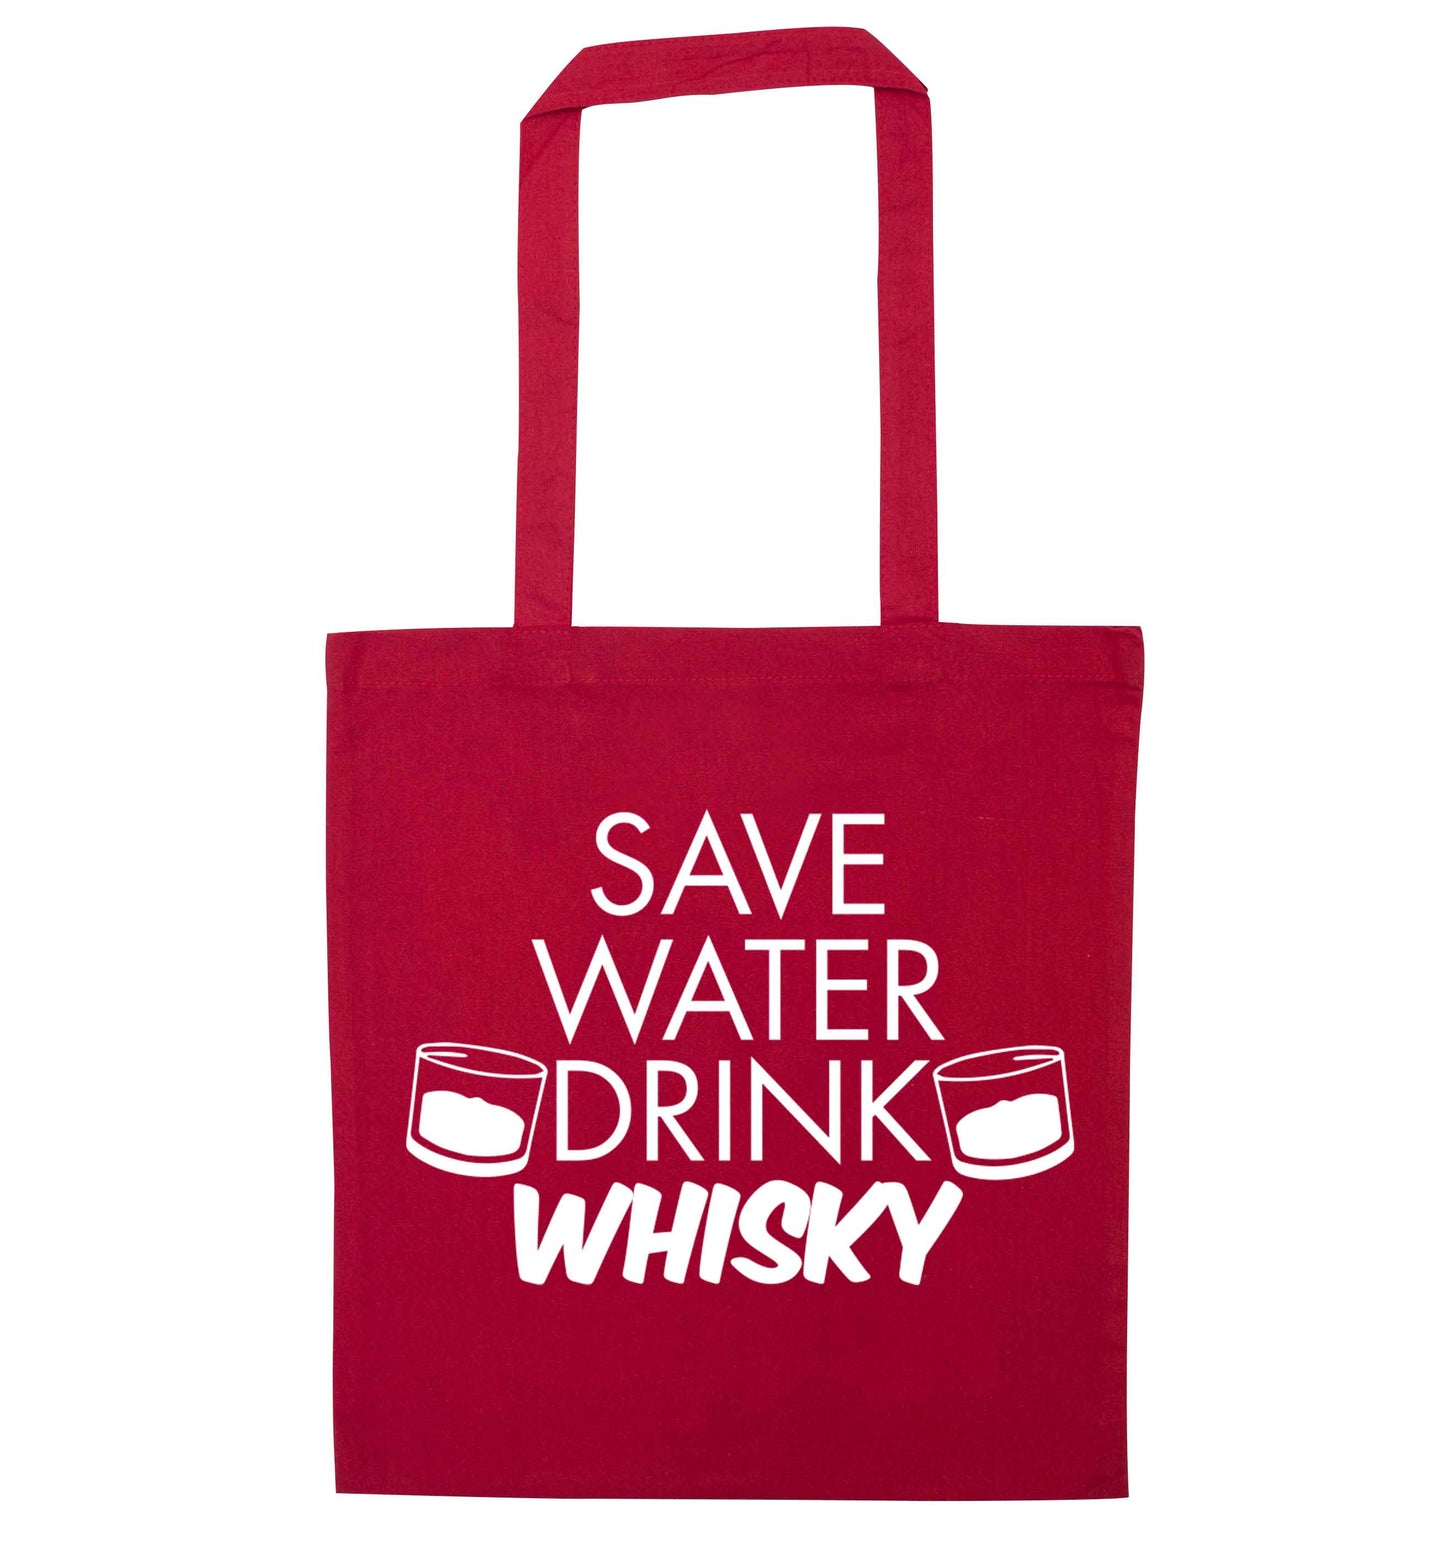 Save water drink whisky red tote bag